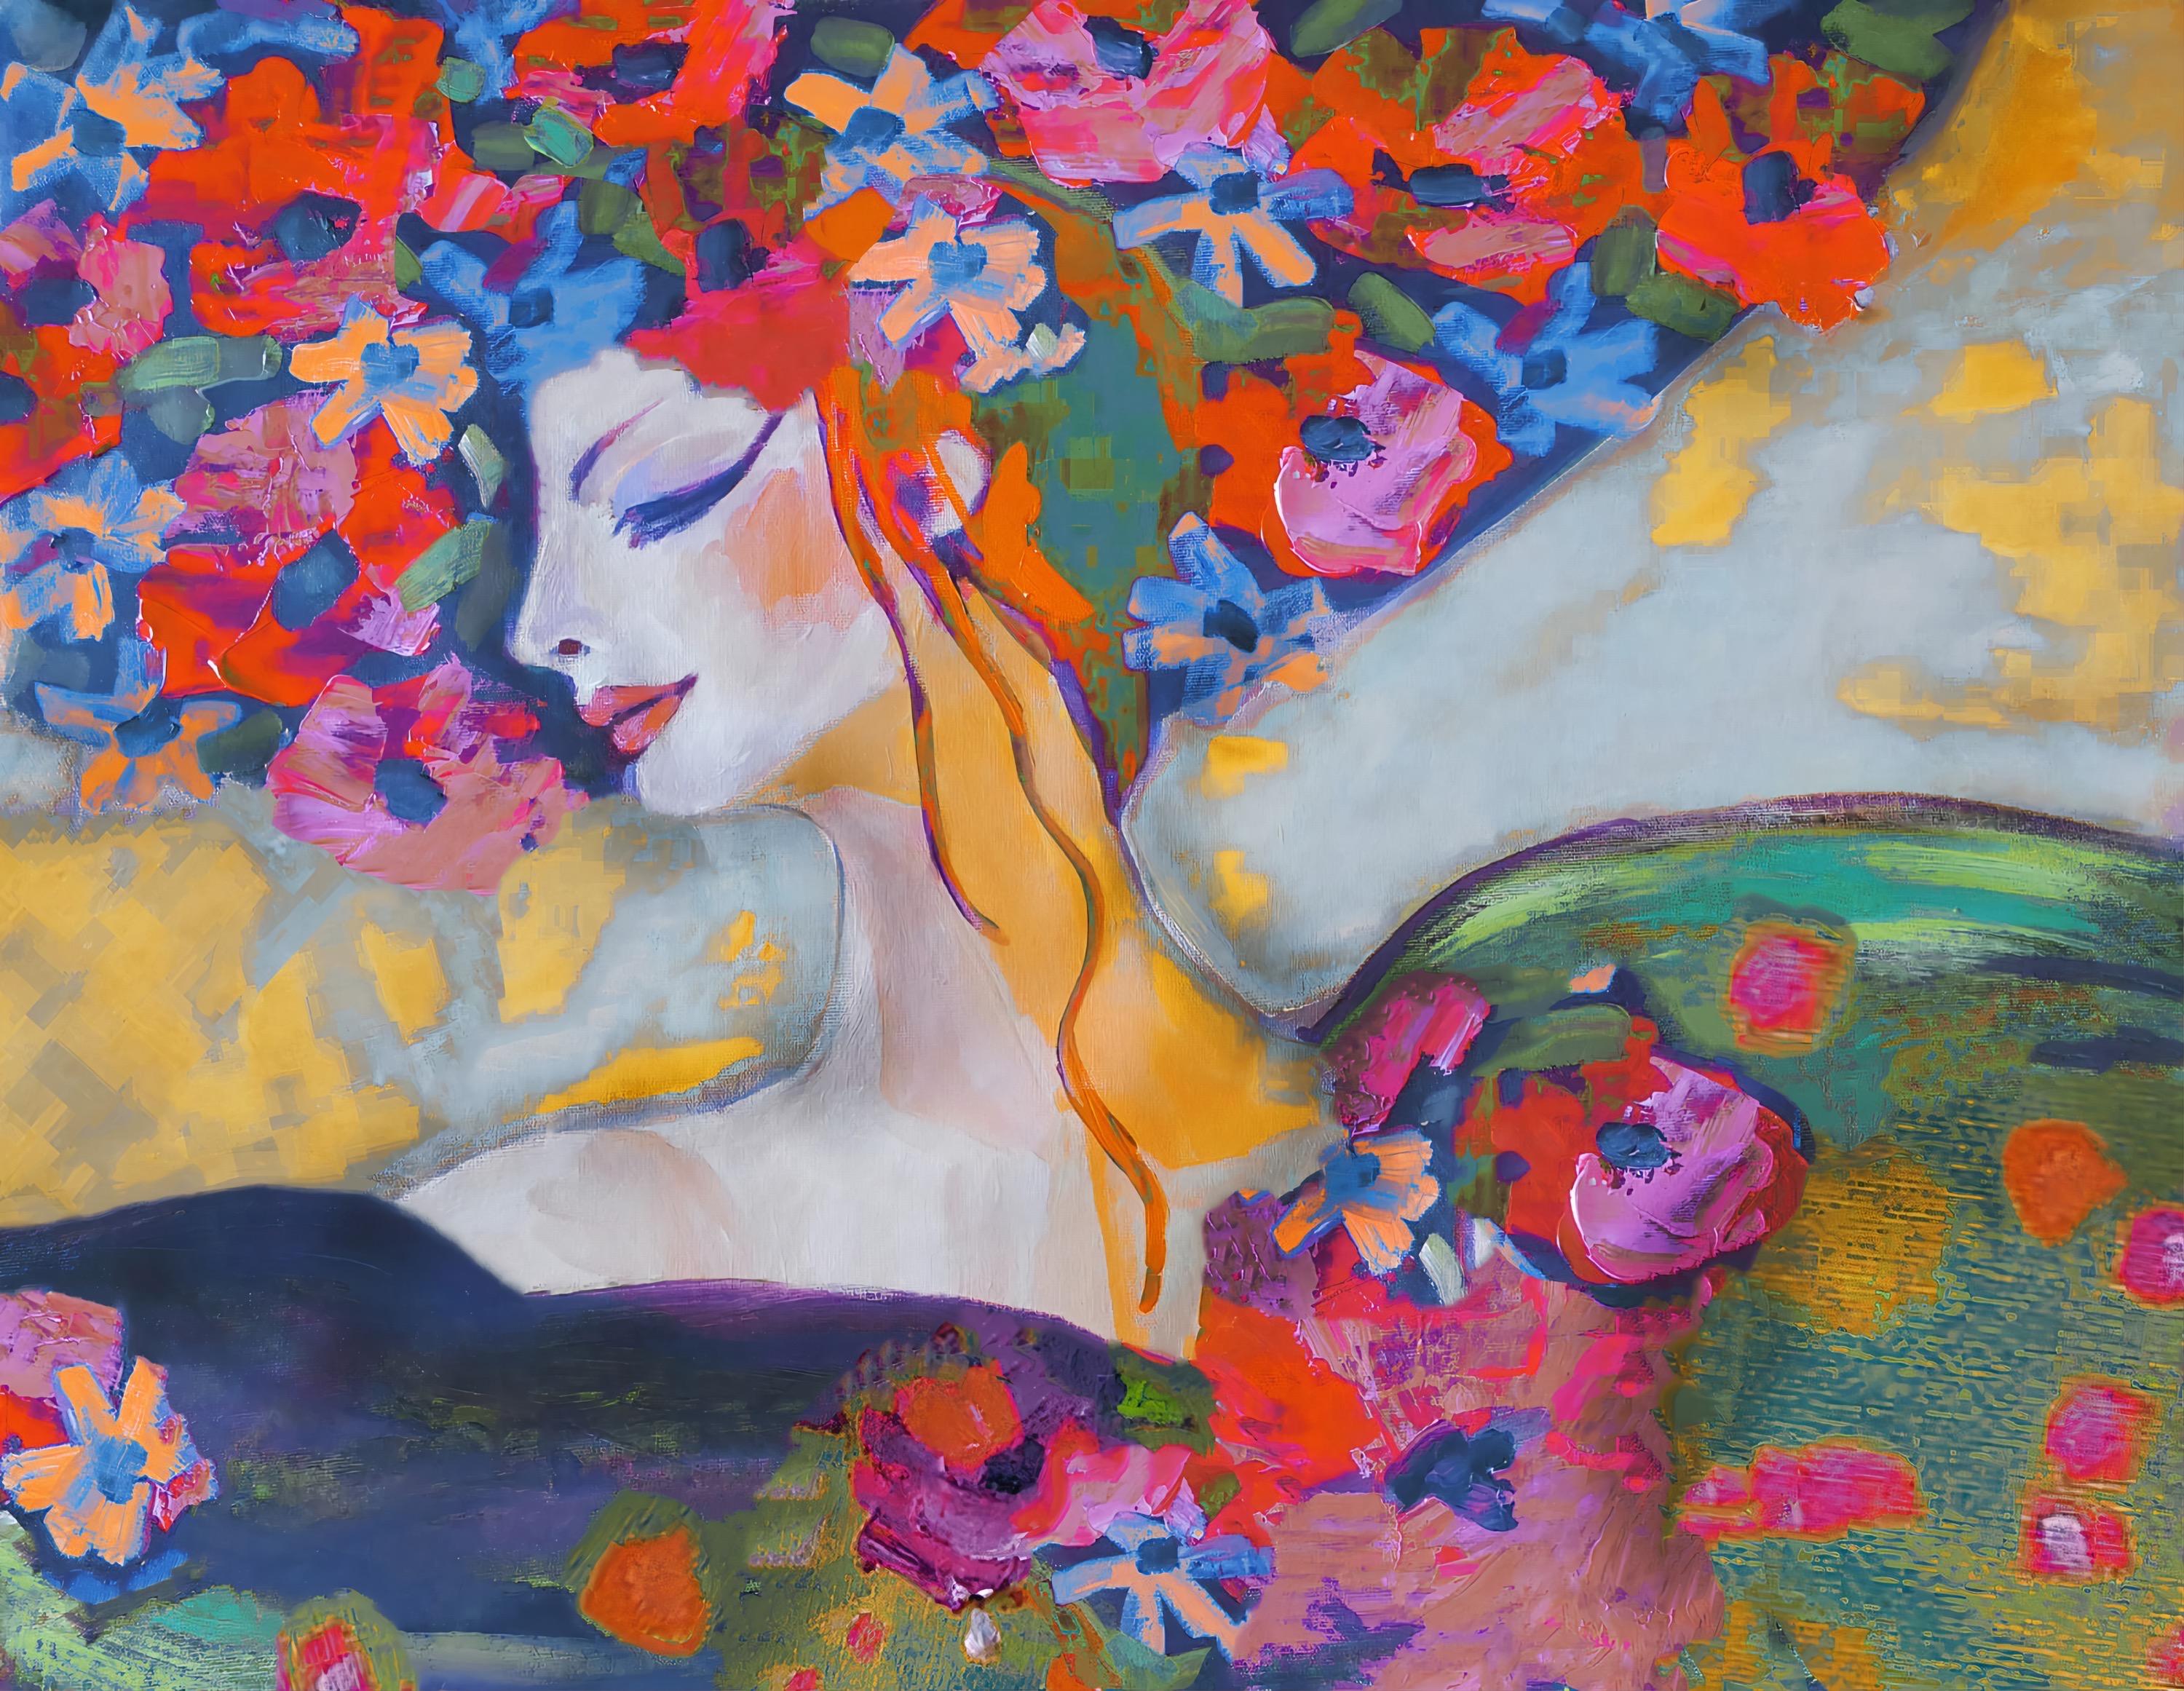 Maya Green Figurative Painting - Floral Head Romantic Painting Textured Giclee on Canvas 45x60" Spring is Here 